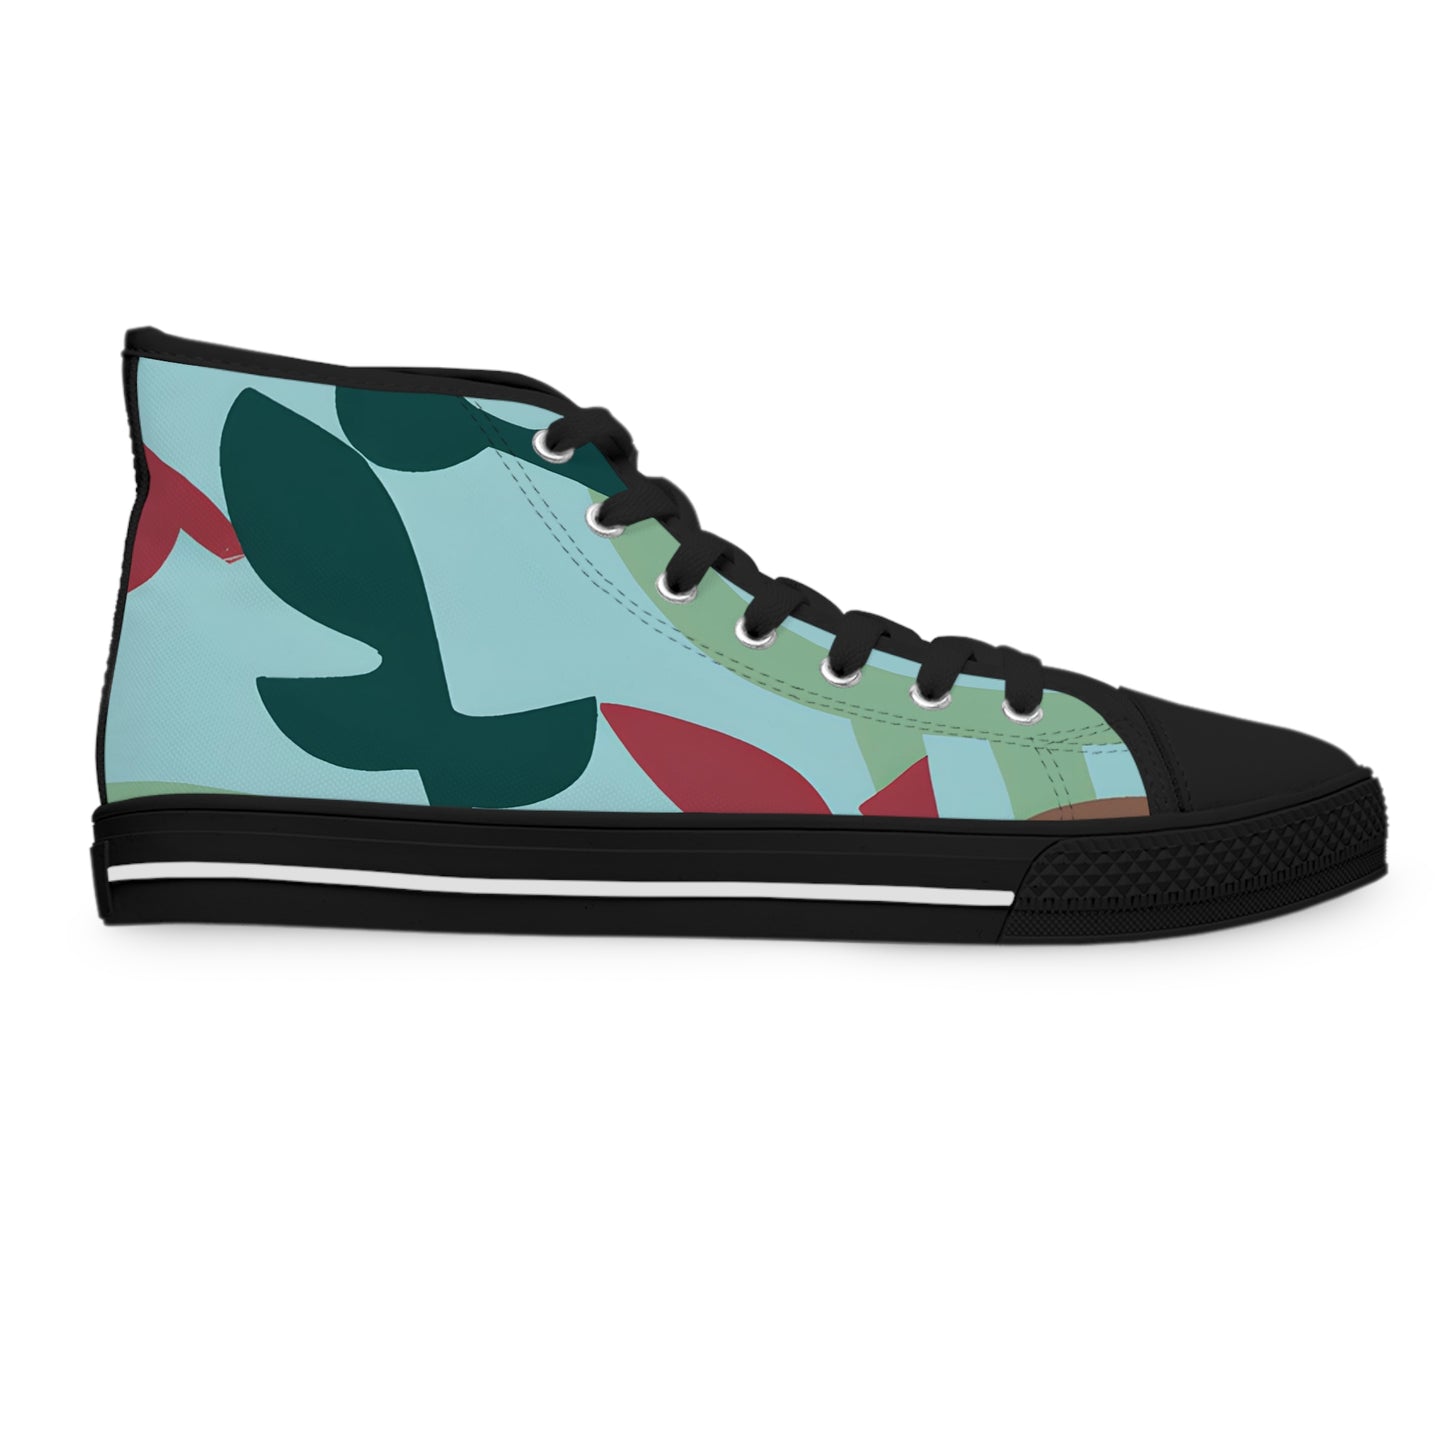 Chaparral Ione - Women's High-Top Sneakers